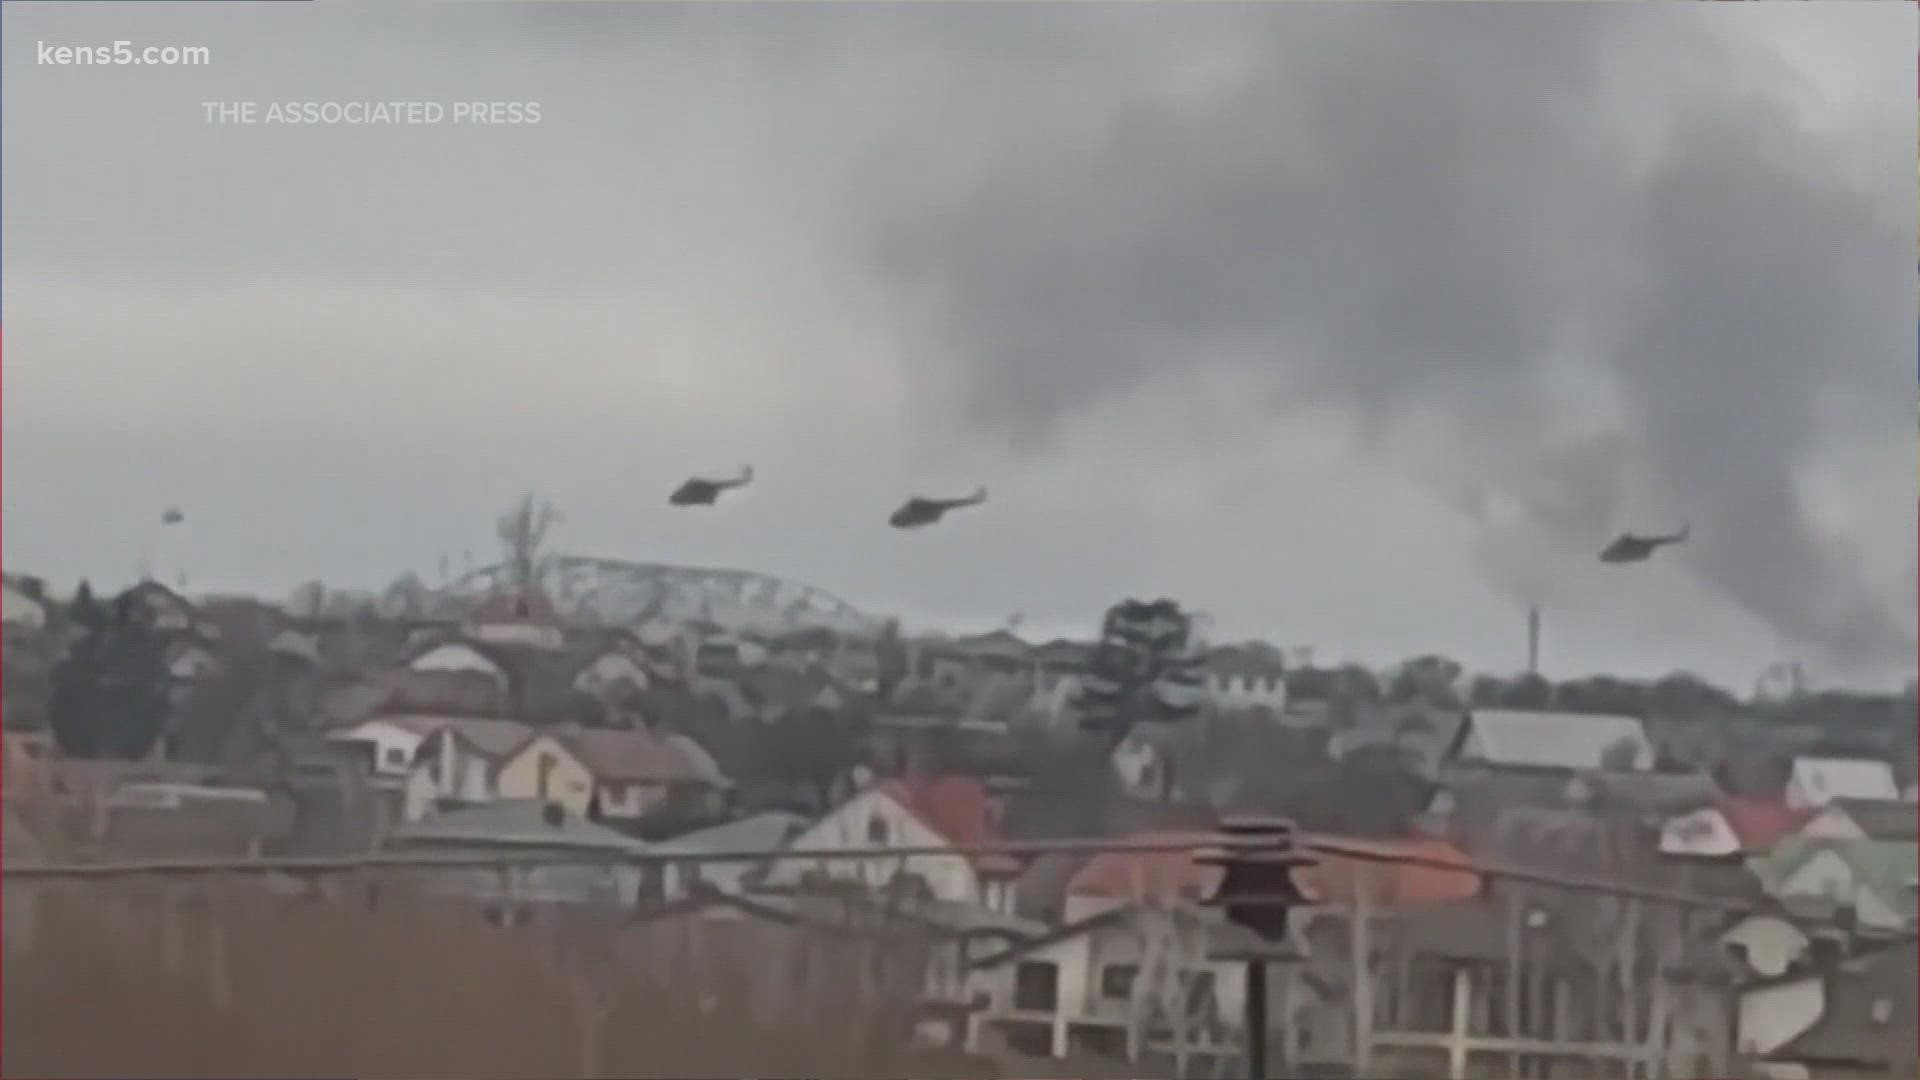 Heavy shelling continues across several major cities in Ukraine.